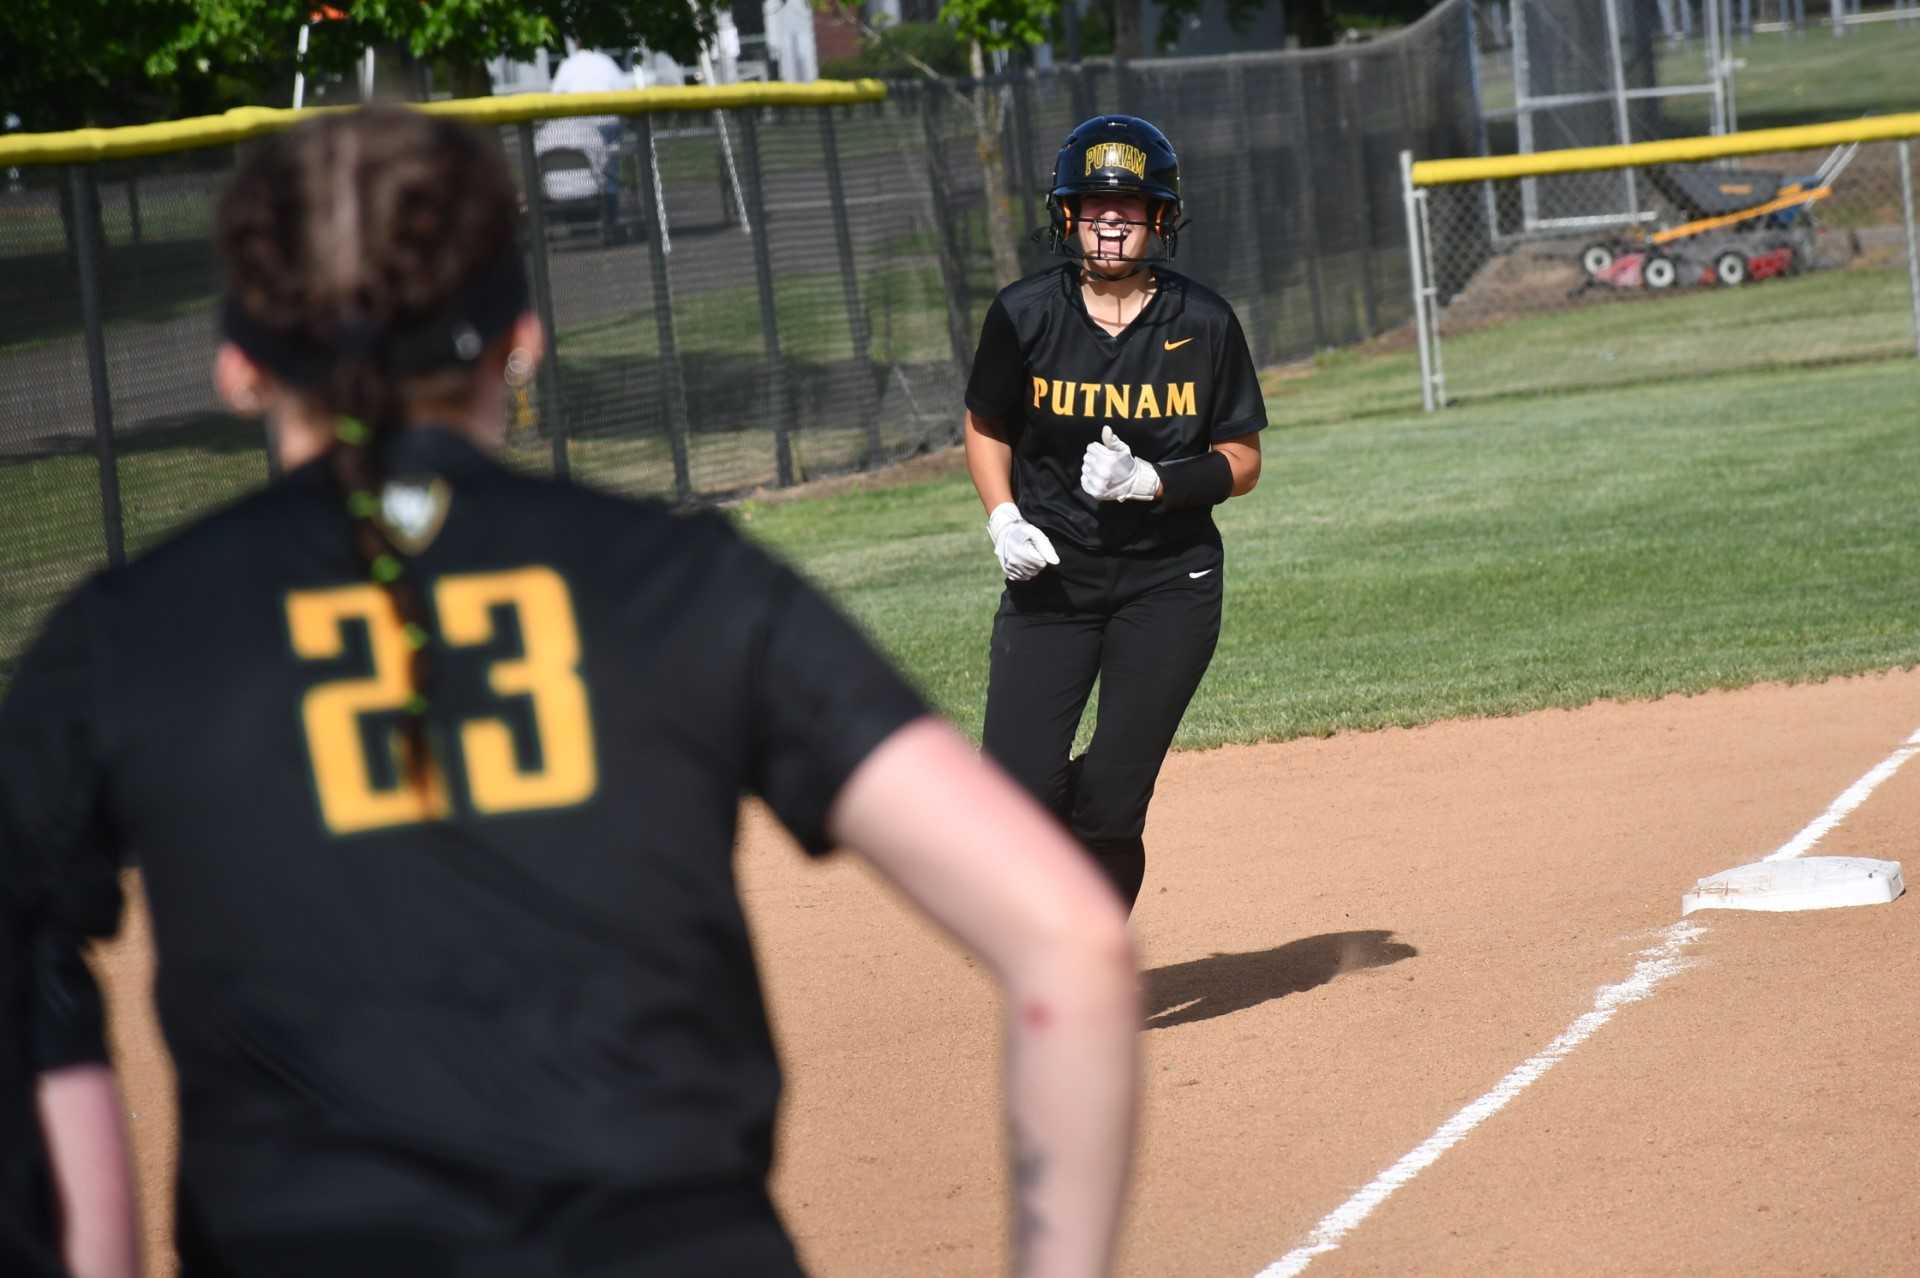 Putnam's Kaitlyn Berry rounds third base after her two-run homer in the third inning Tuesday. (Photo by Jeremy McDonald)